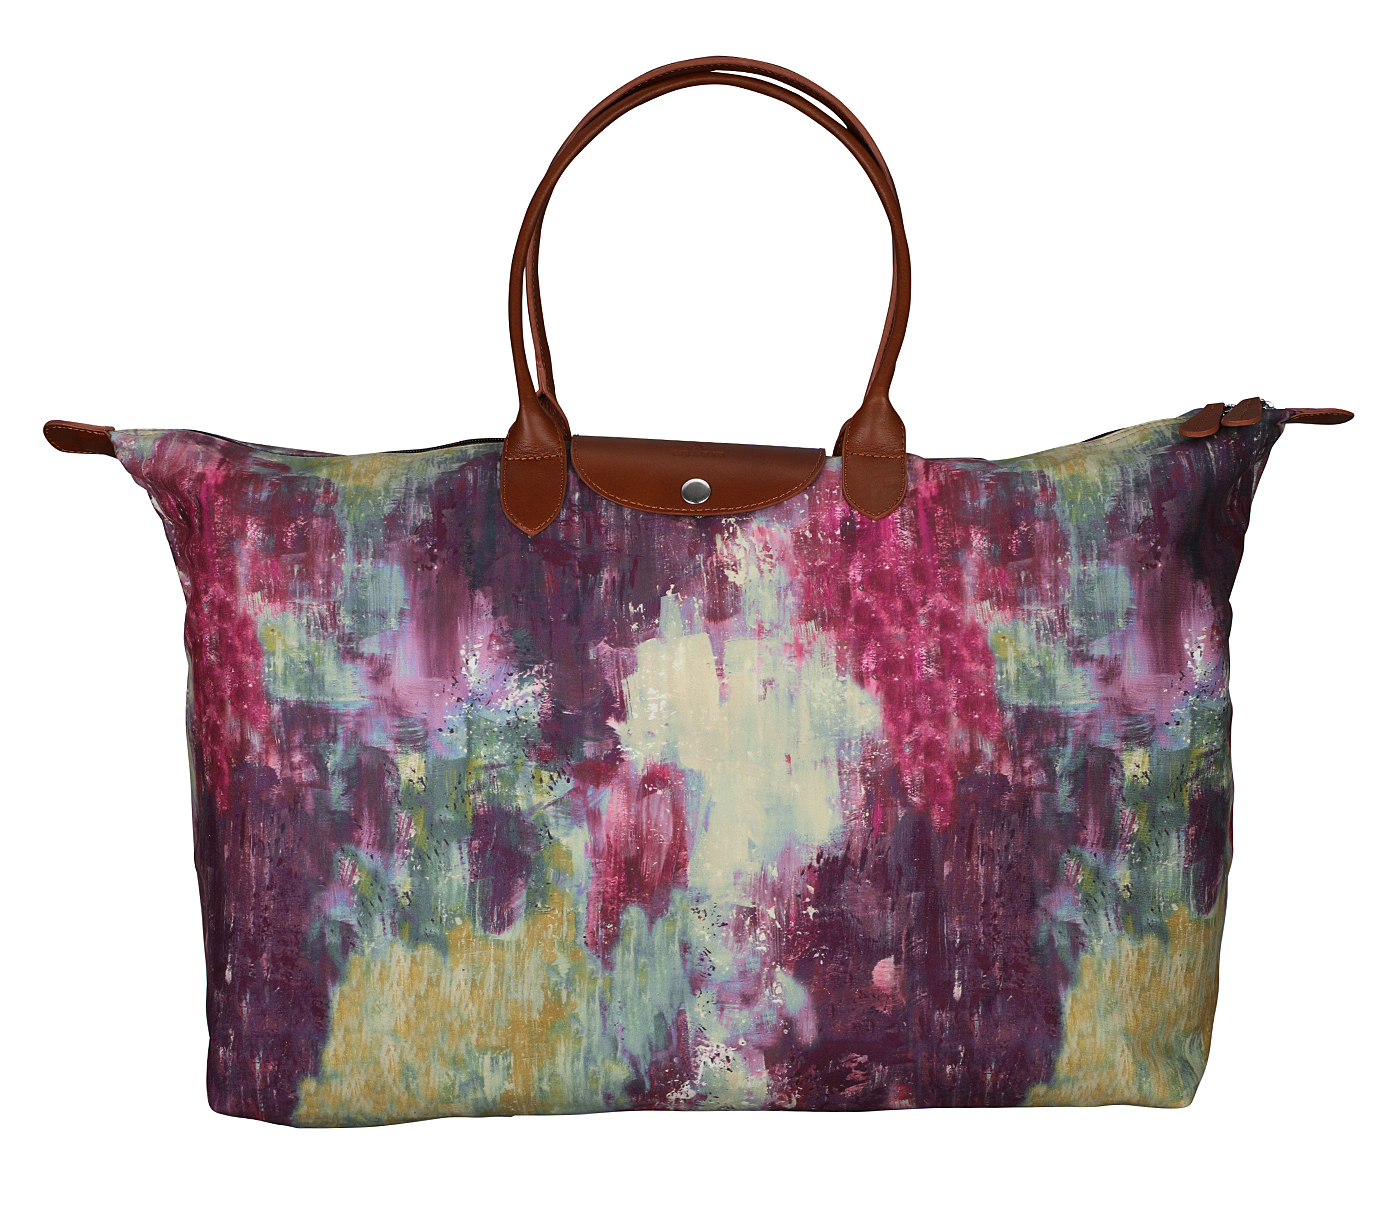 B881--Maite Folding tote in Abstract print material with genuine leather handles and flap - Wine